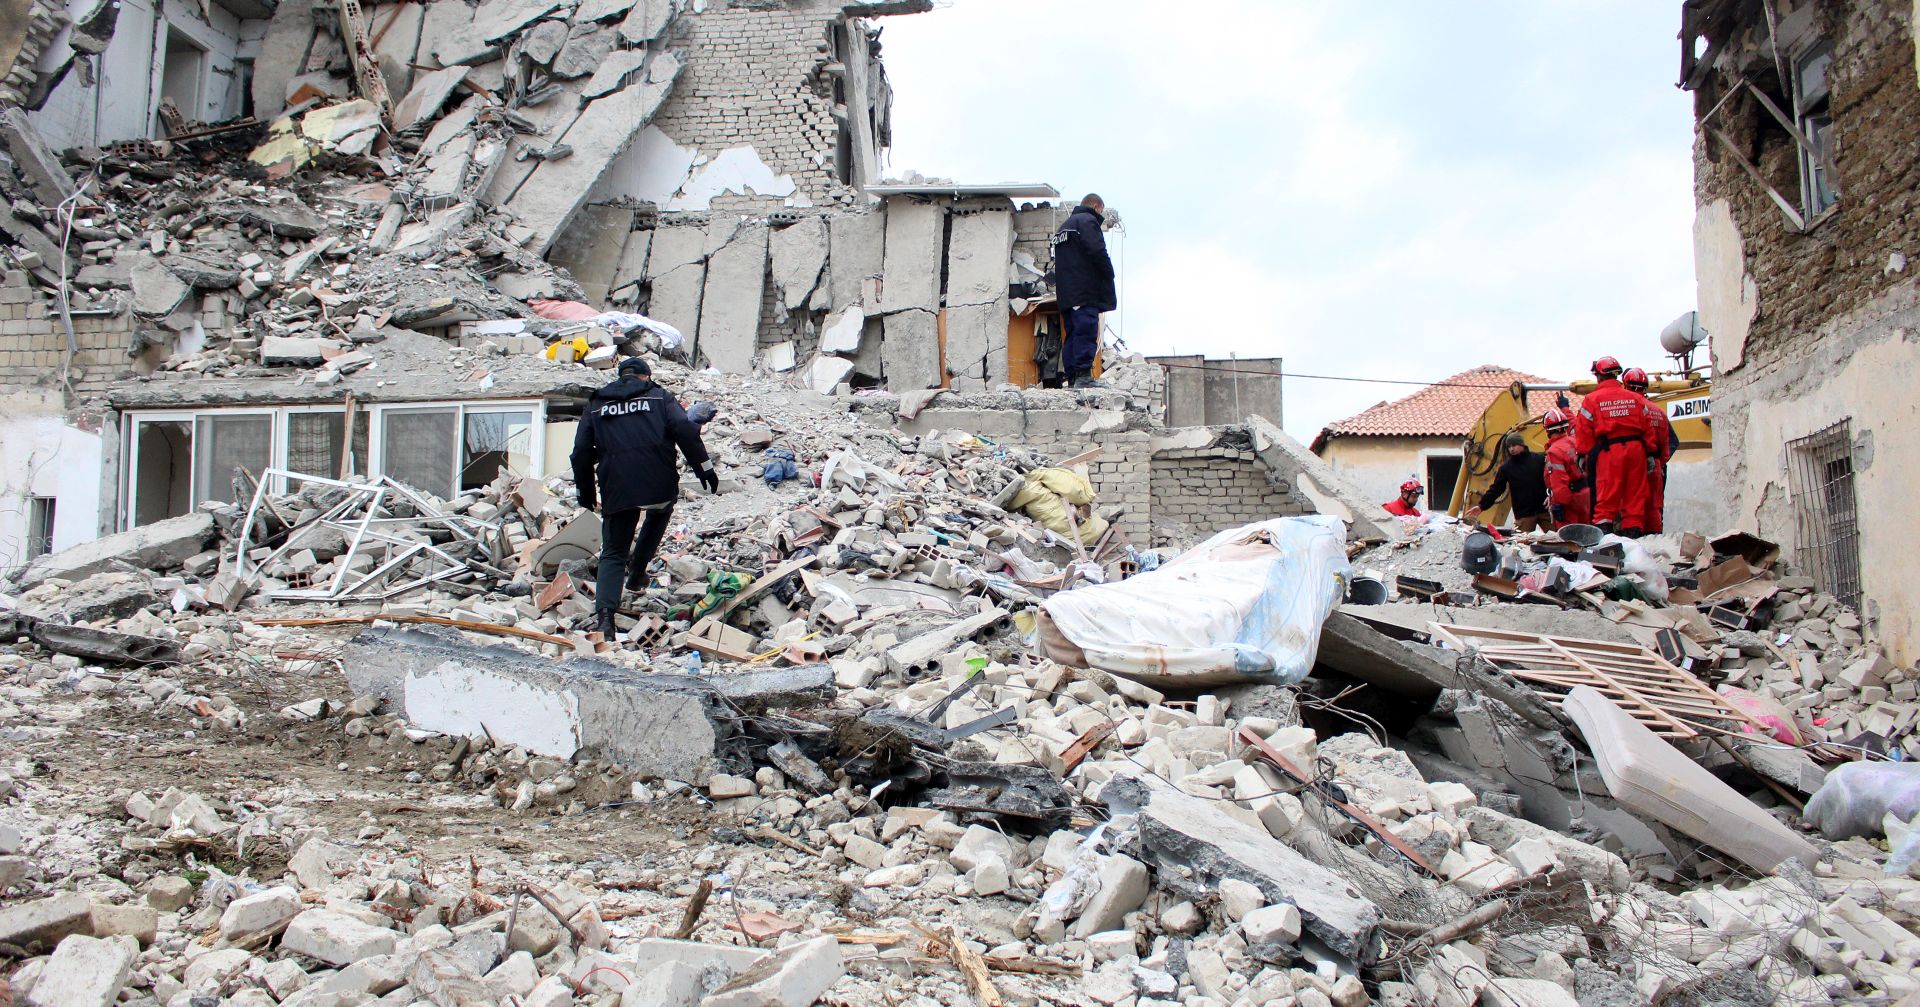 epa08028517 Rescue teams for Natural Disasters from Serbia search for victims in the rubbles of a building after the earthquake in Thumane, Albania, 27 November 2019. Over two hundreed specialist from the EU has arrived in Albania to help after Albania was hit by a 6.4 magnitude earthquake on 26 November 2019, leaving until now over 30 people dead and 200 injured.  EPA/MALTON DIBRA